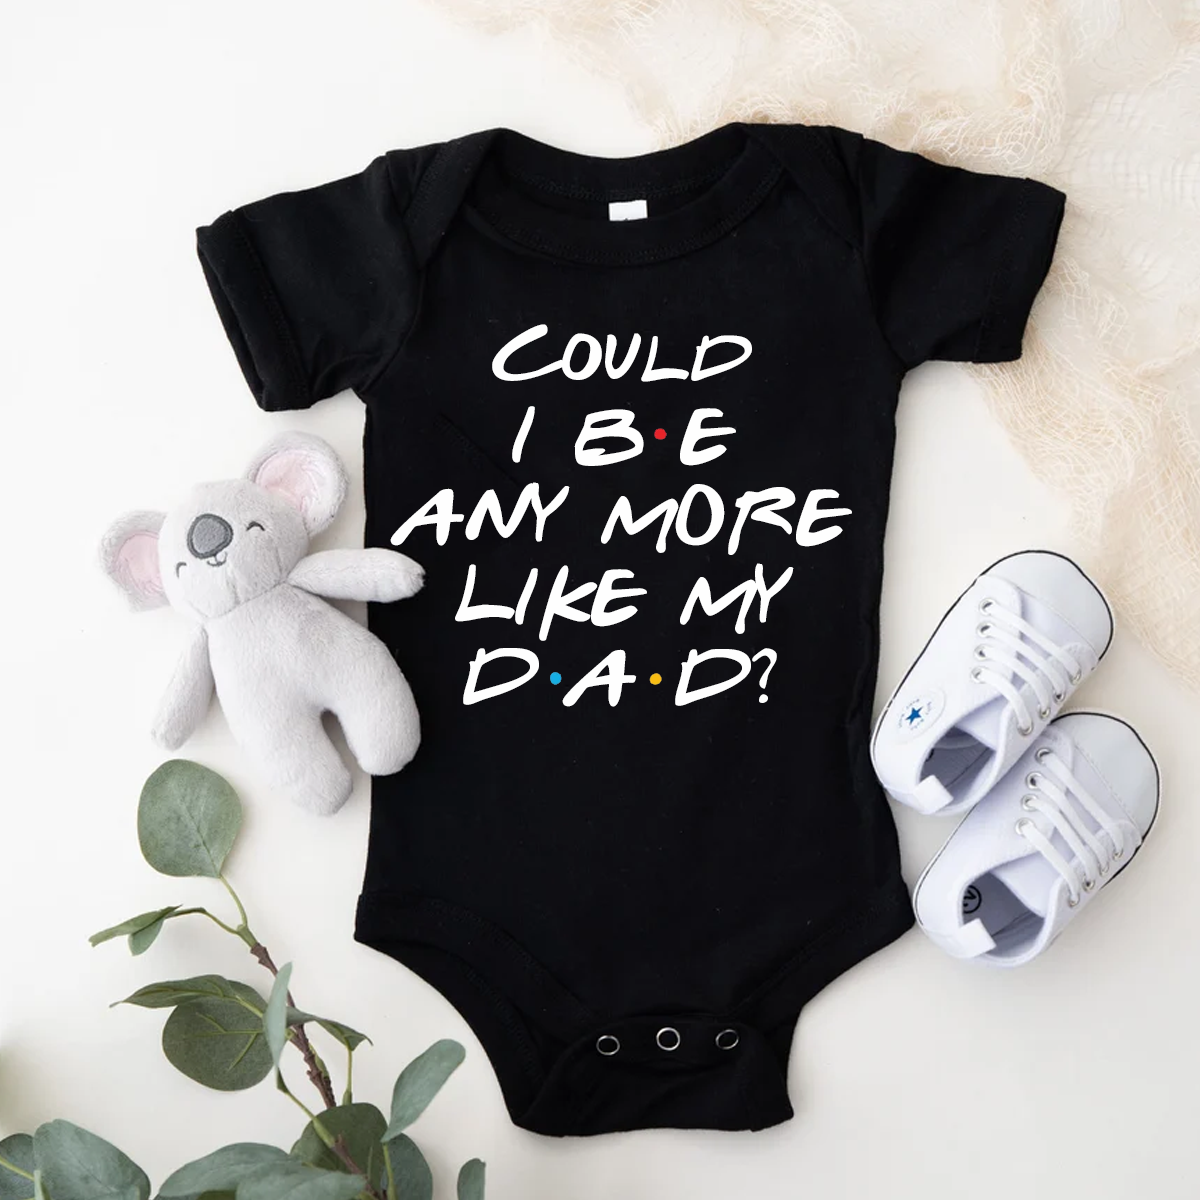 Could I BE any more like my dad? FRIENDS Funny Baby Vest Bodysuit